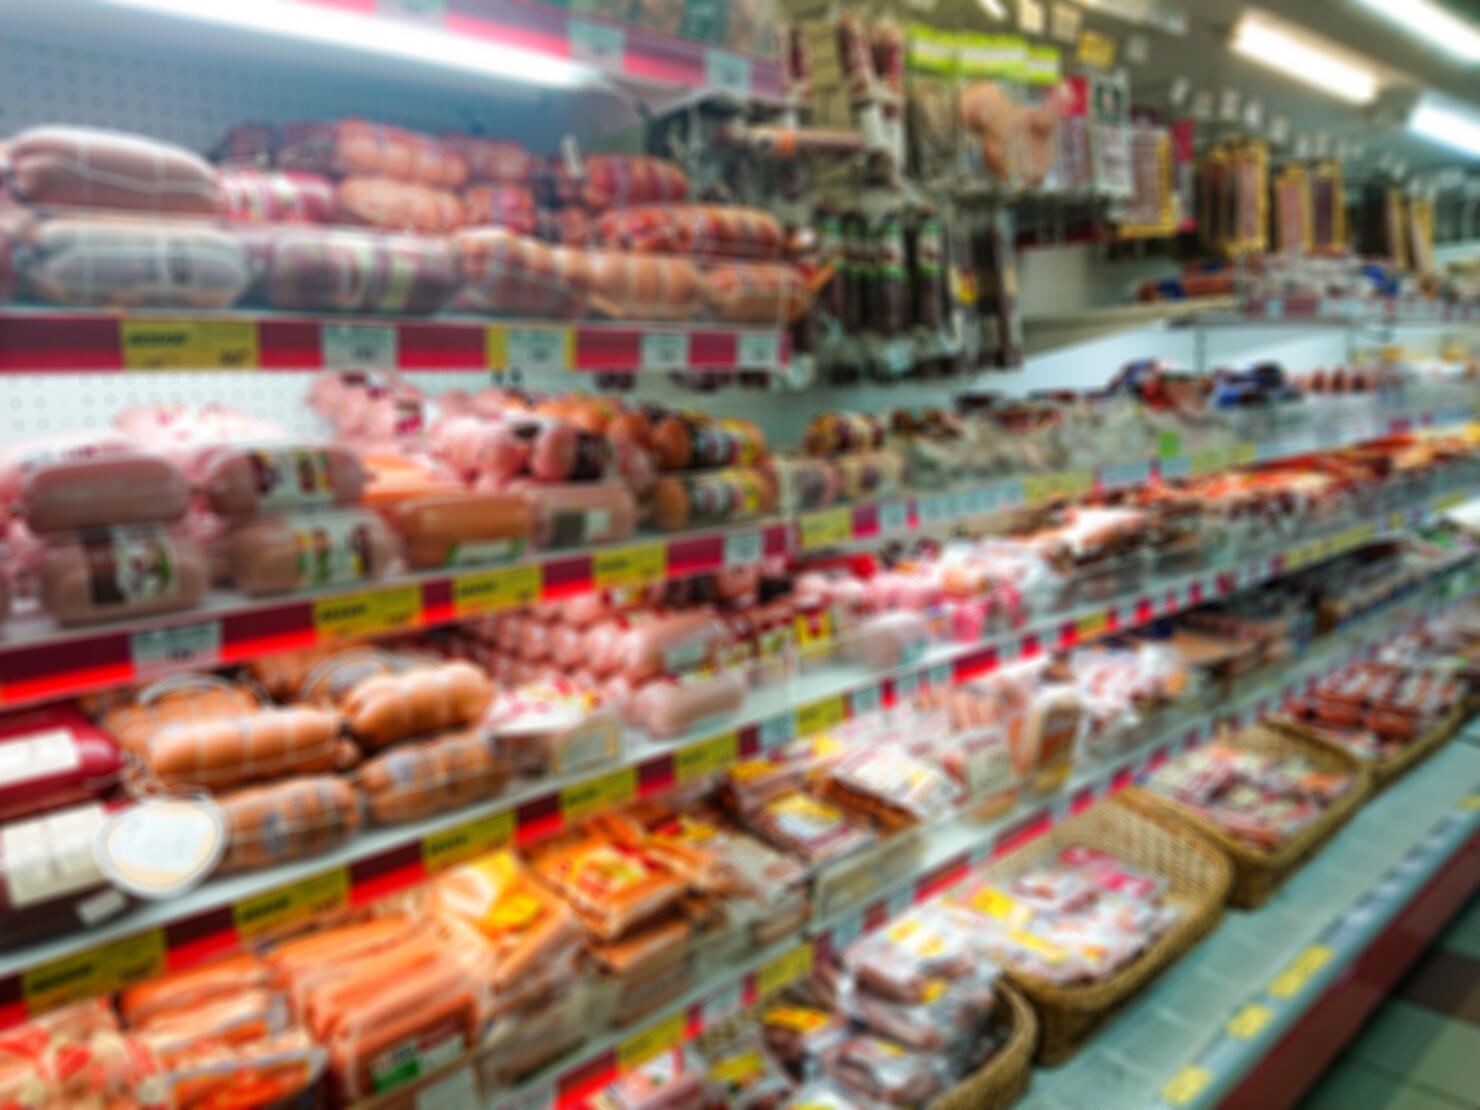 Blurred abstract image. Goods on the shelf of a grocery store. Meat and sausage products